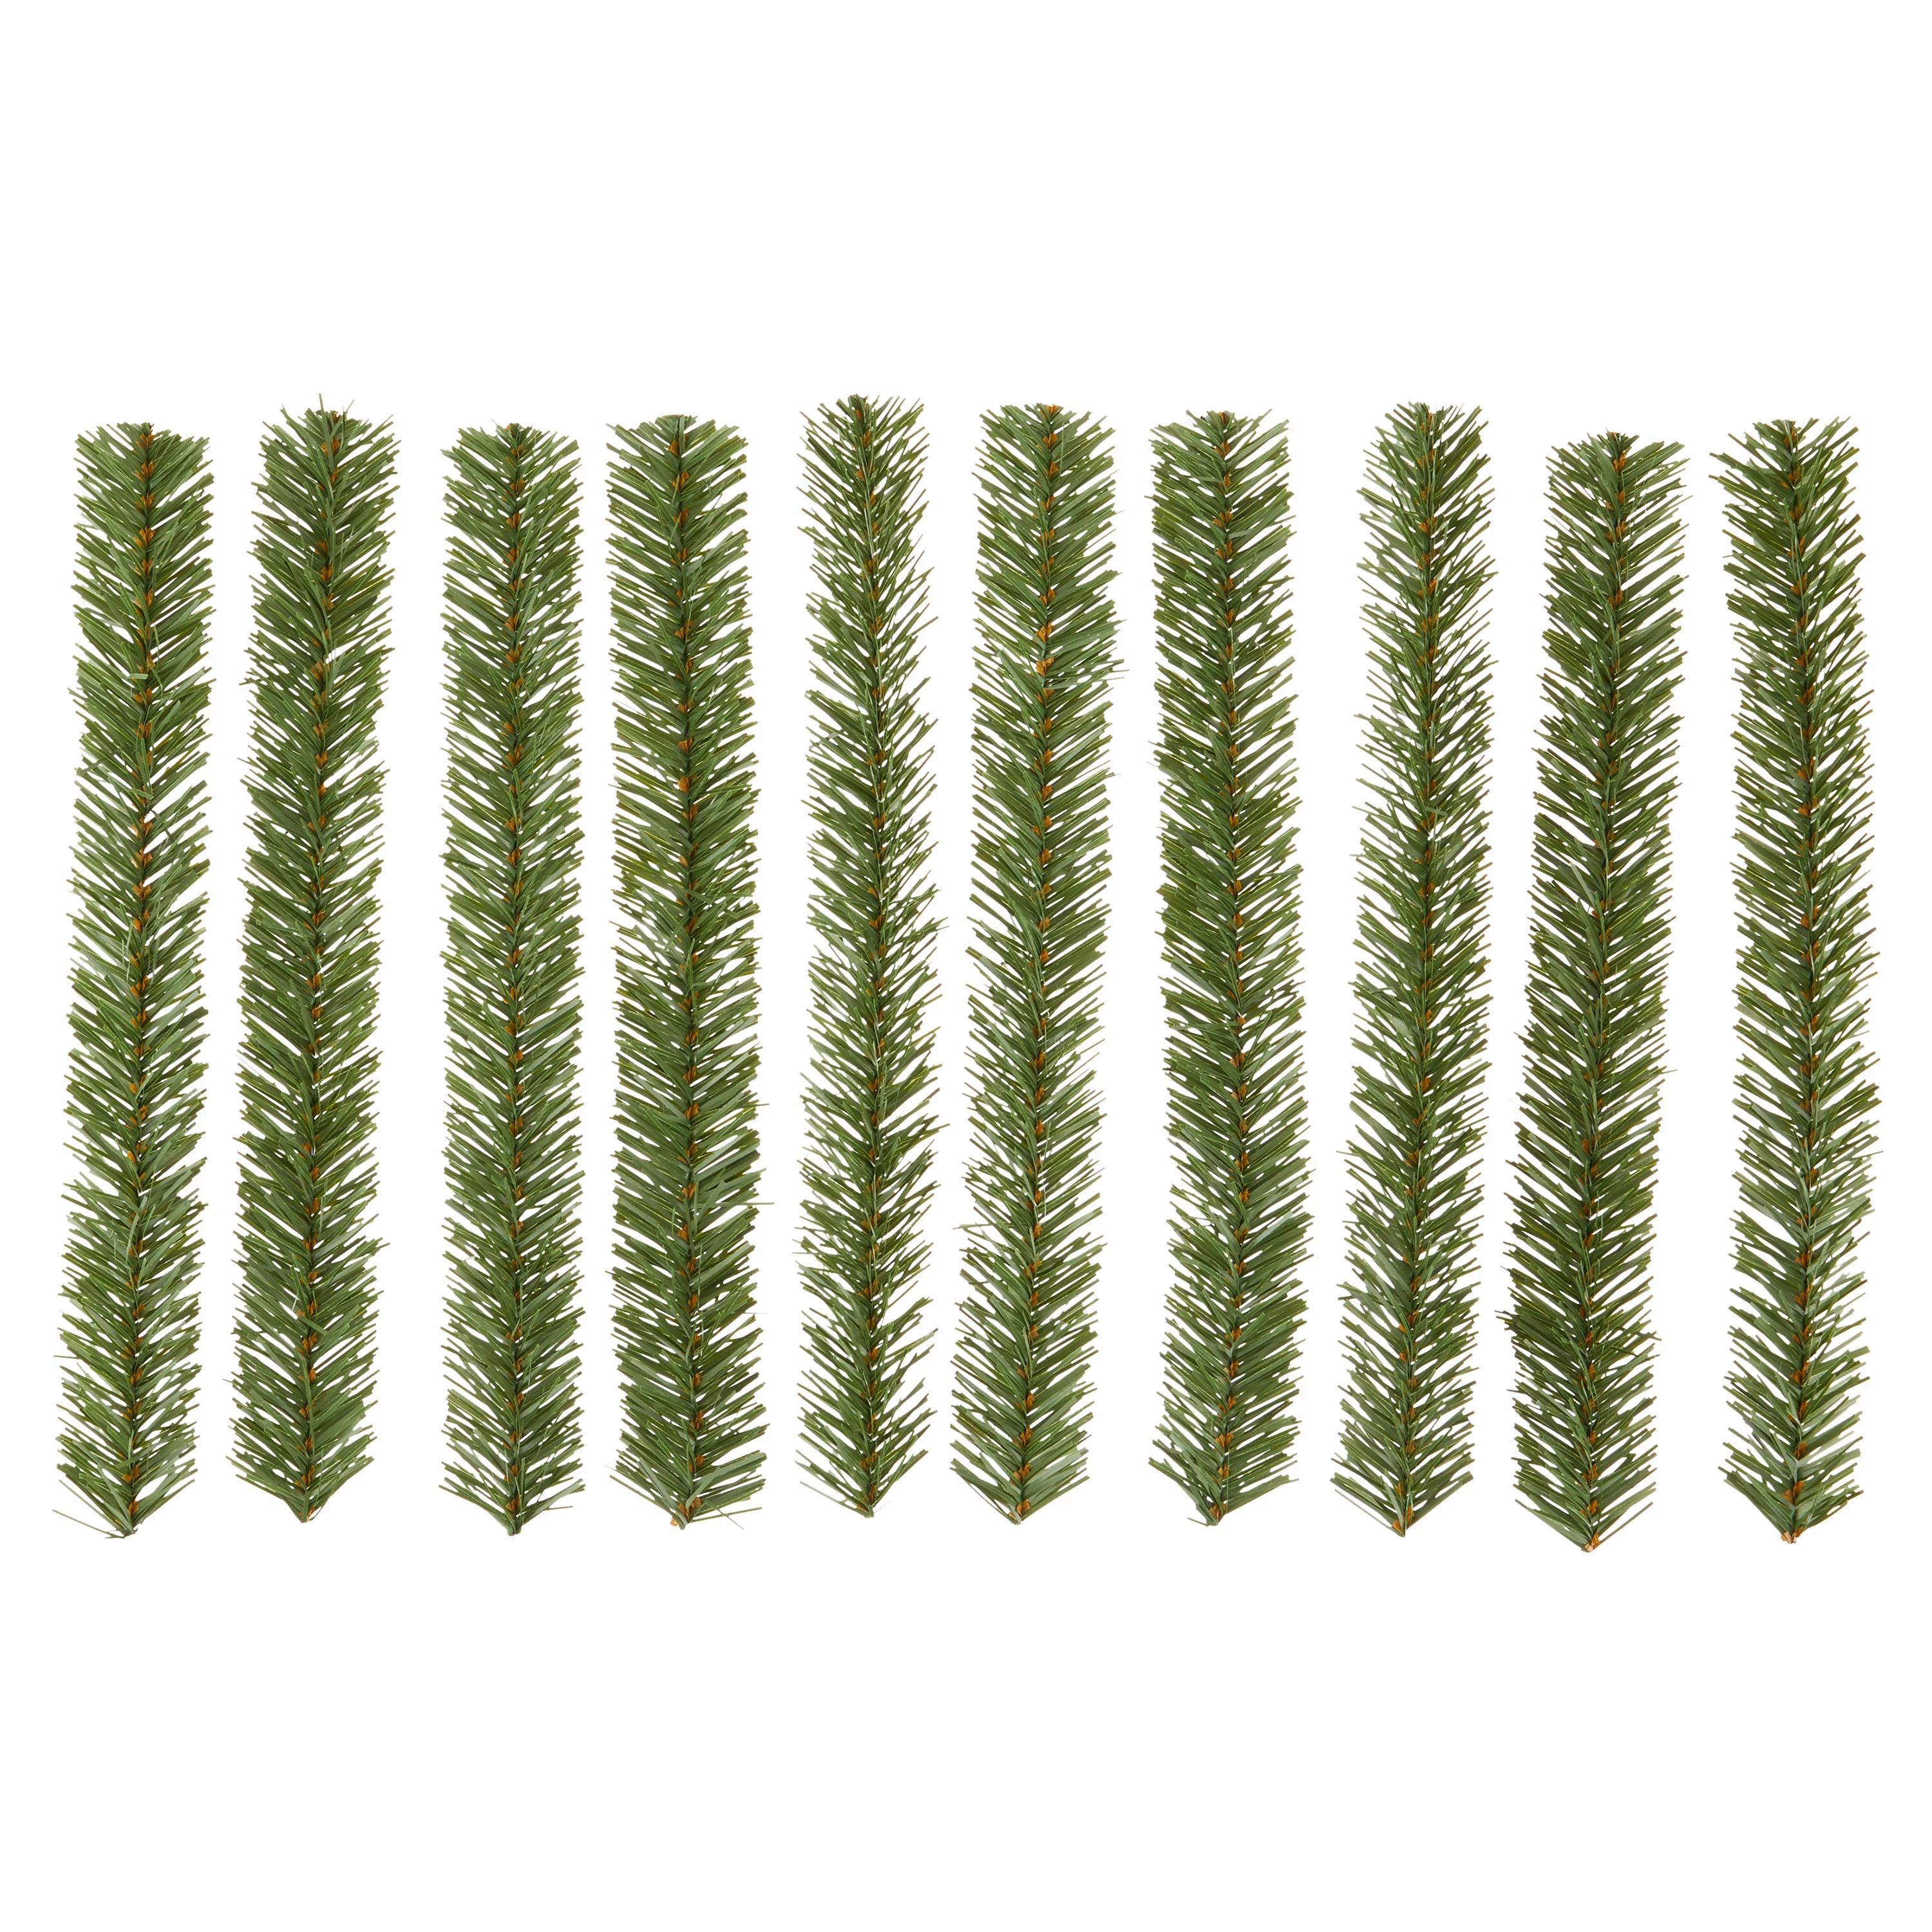 PVC Christmas Garland Ties, 12", 10 Count, by Holiday Time | Walmart (US)